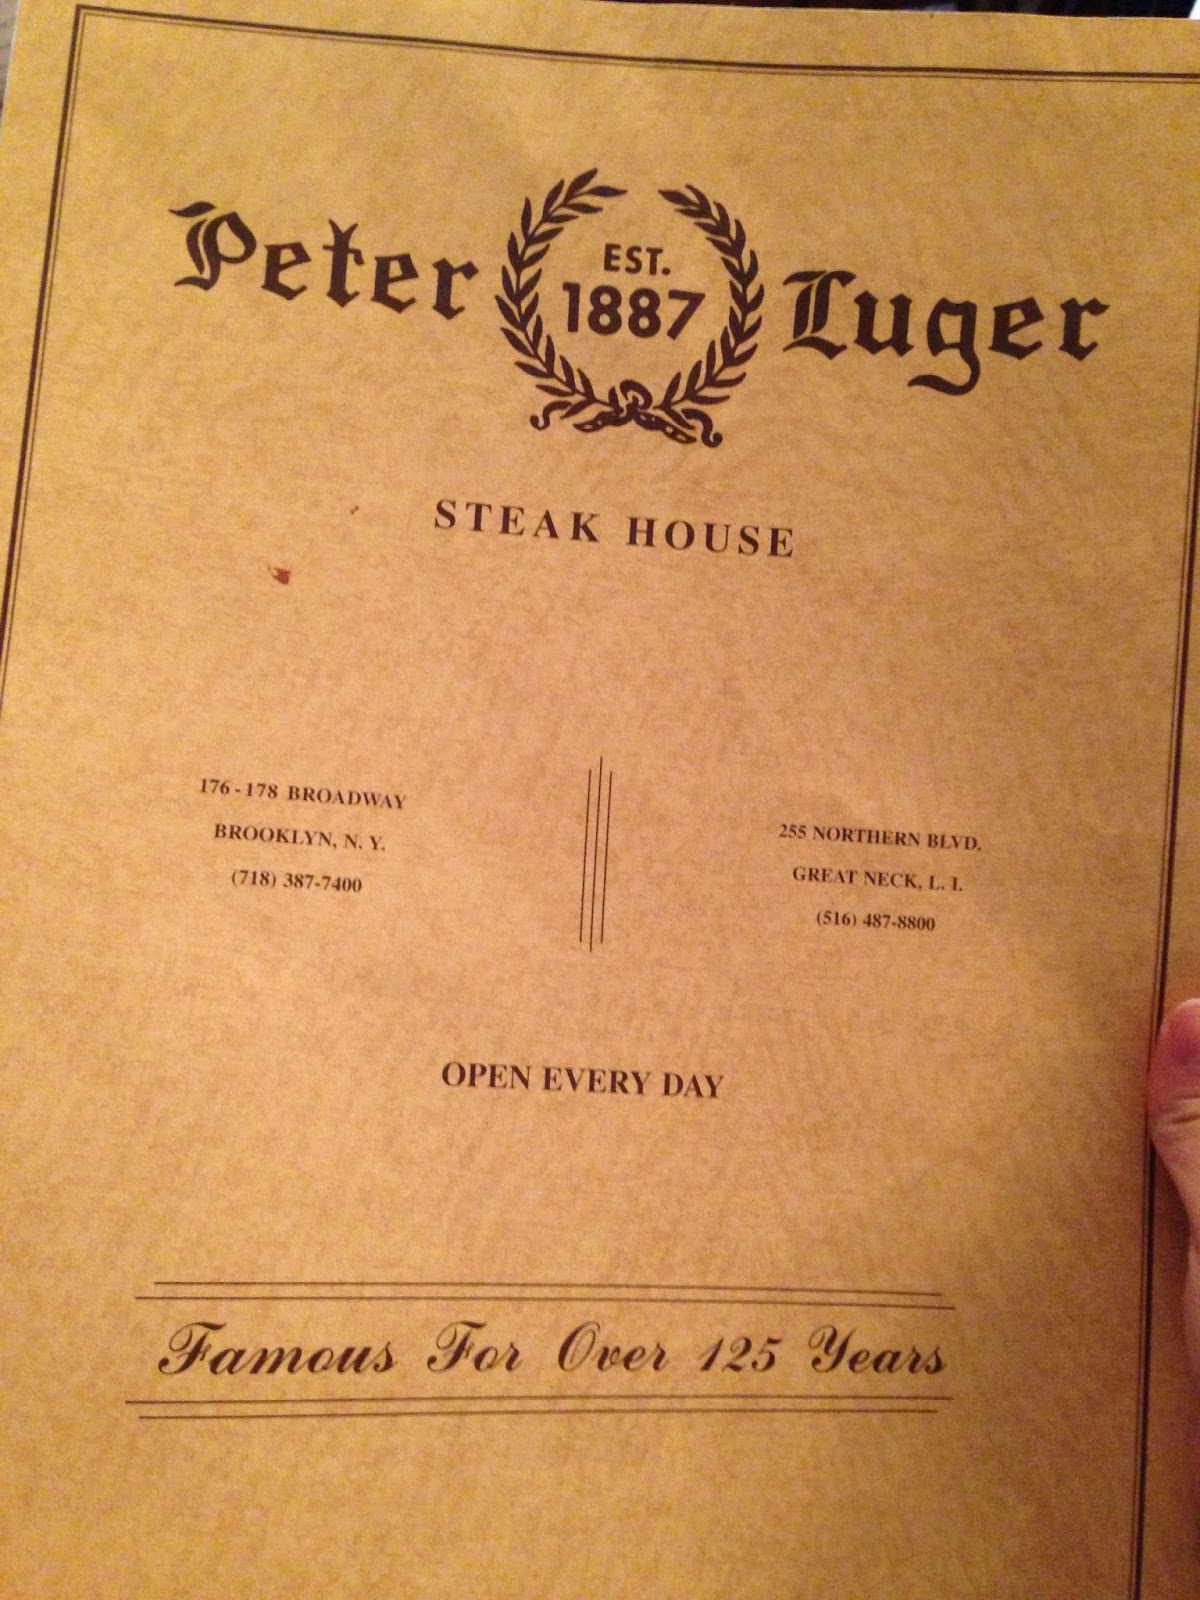 Black and White: [NYC] Peter Luger Steakhouse